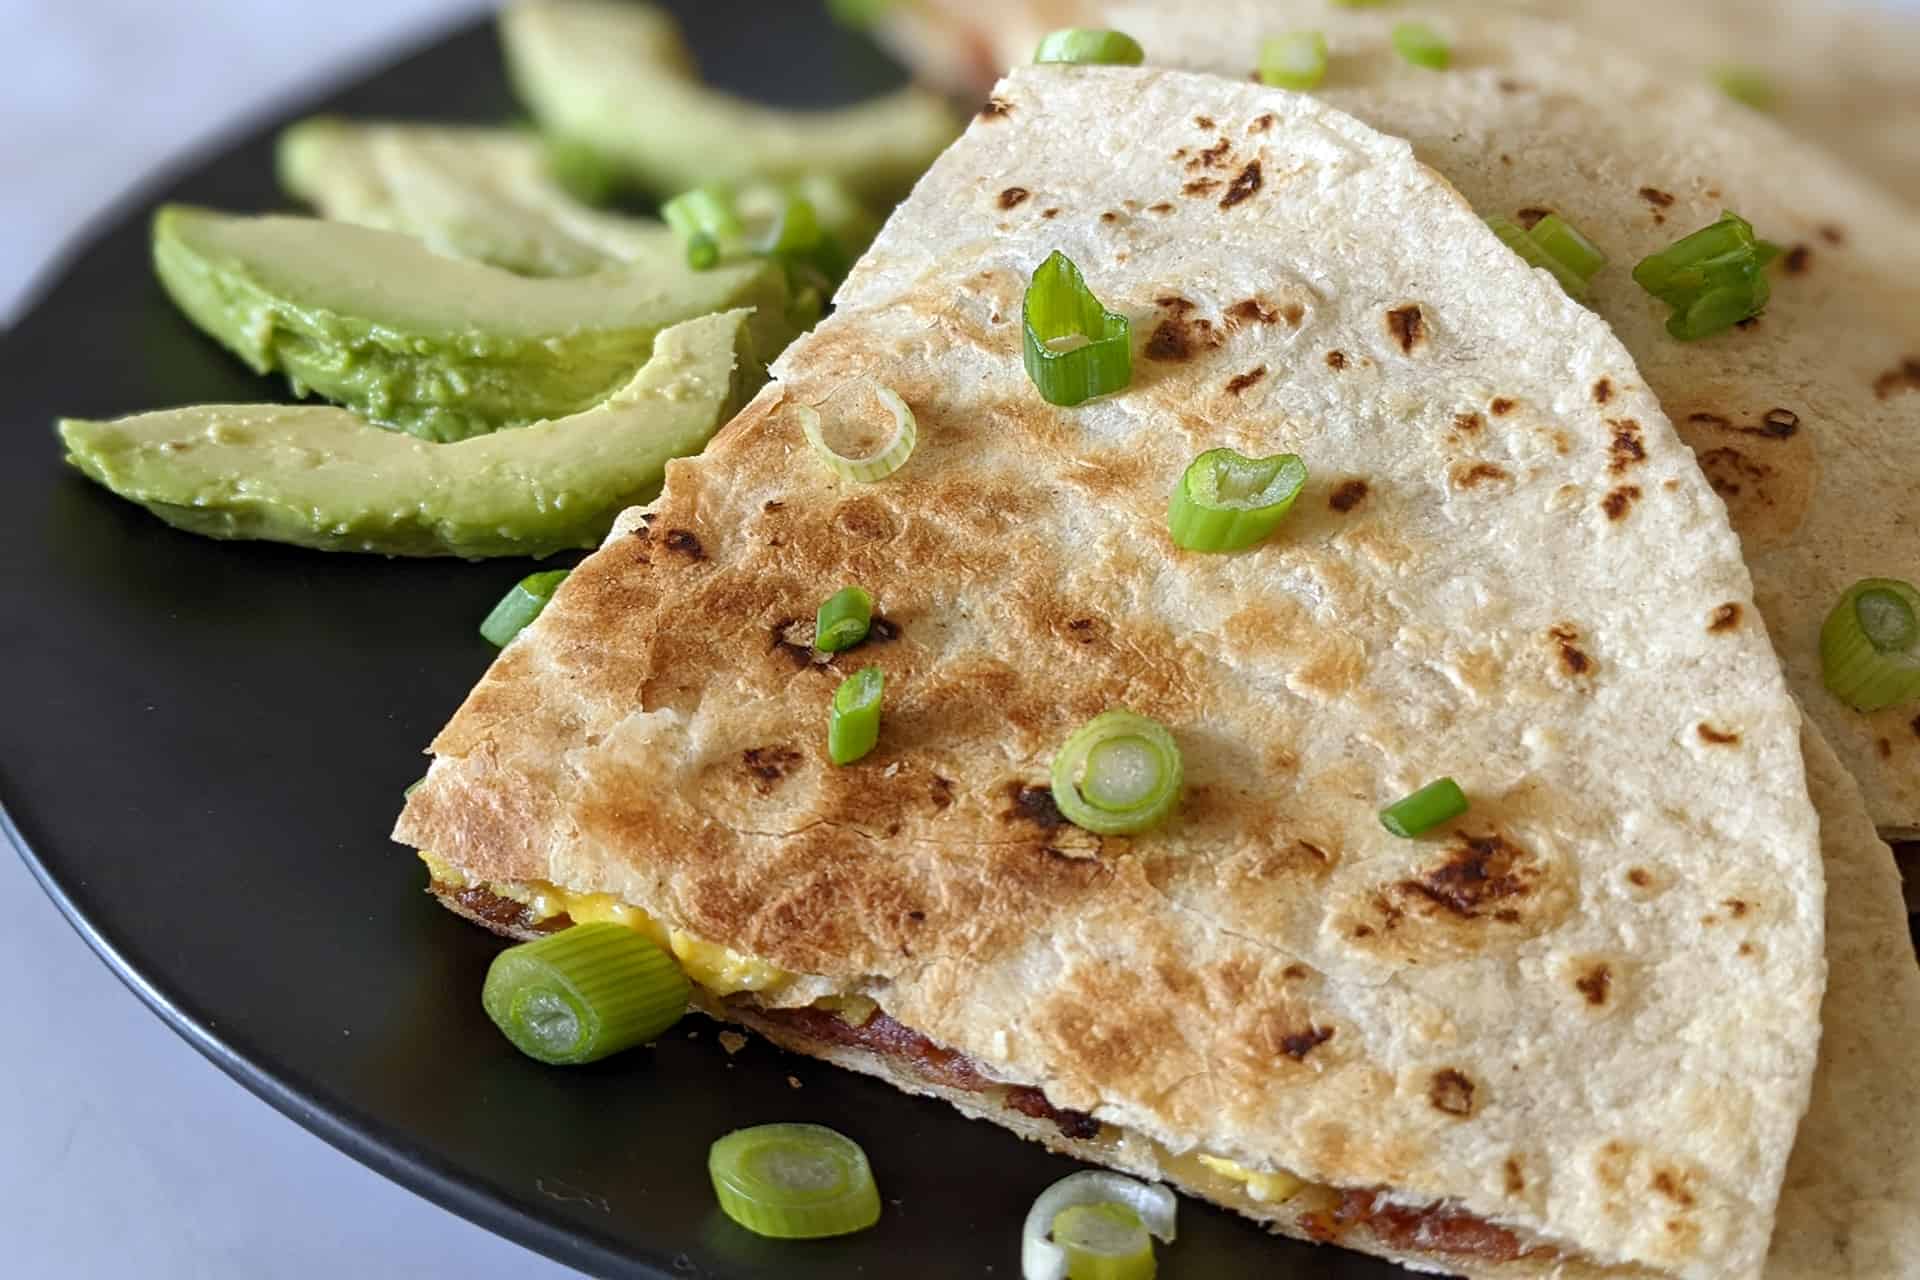 A breakfast quesadilla with bacon, eggs, and cheese, served with fresh avocado